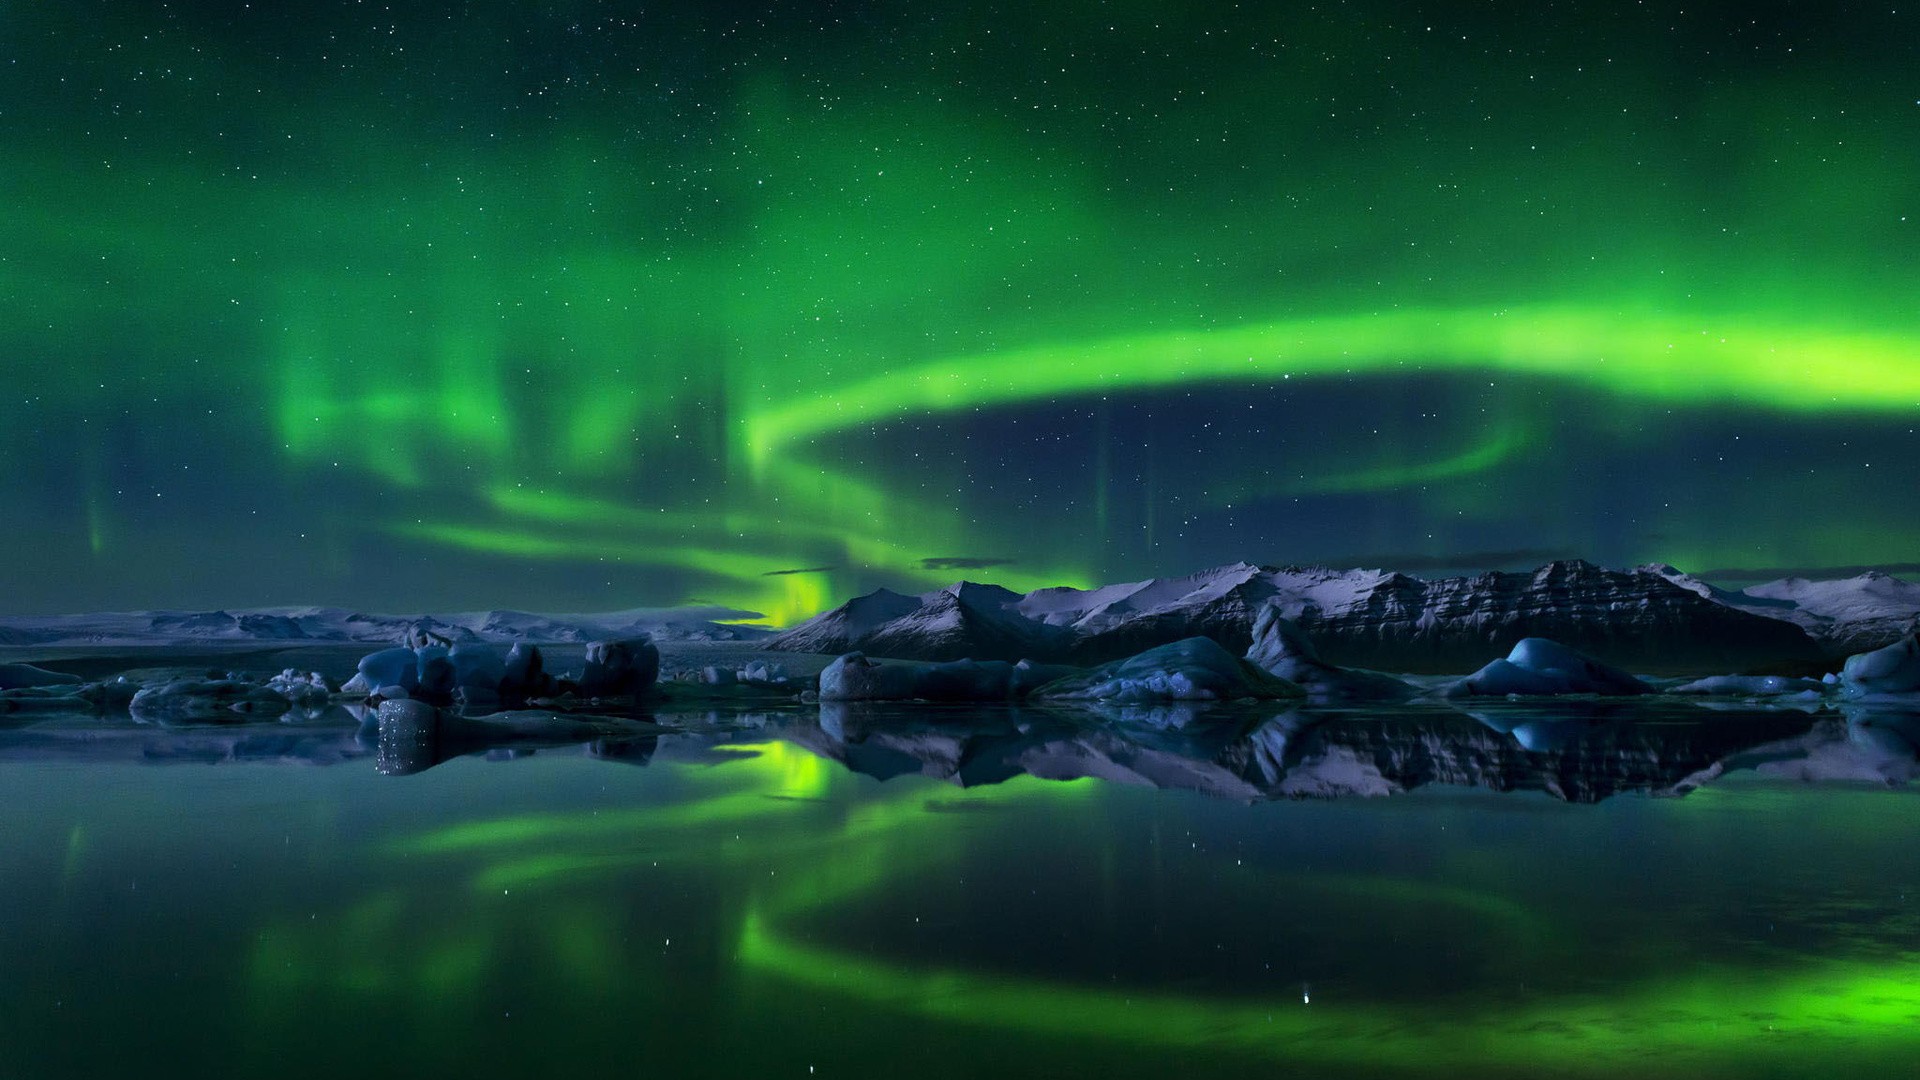 General 1920x1080 nature sky Arctic stars nordic landscapes mountains ice cold outdoors aurorae